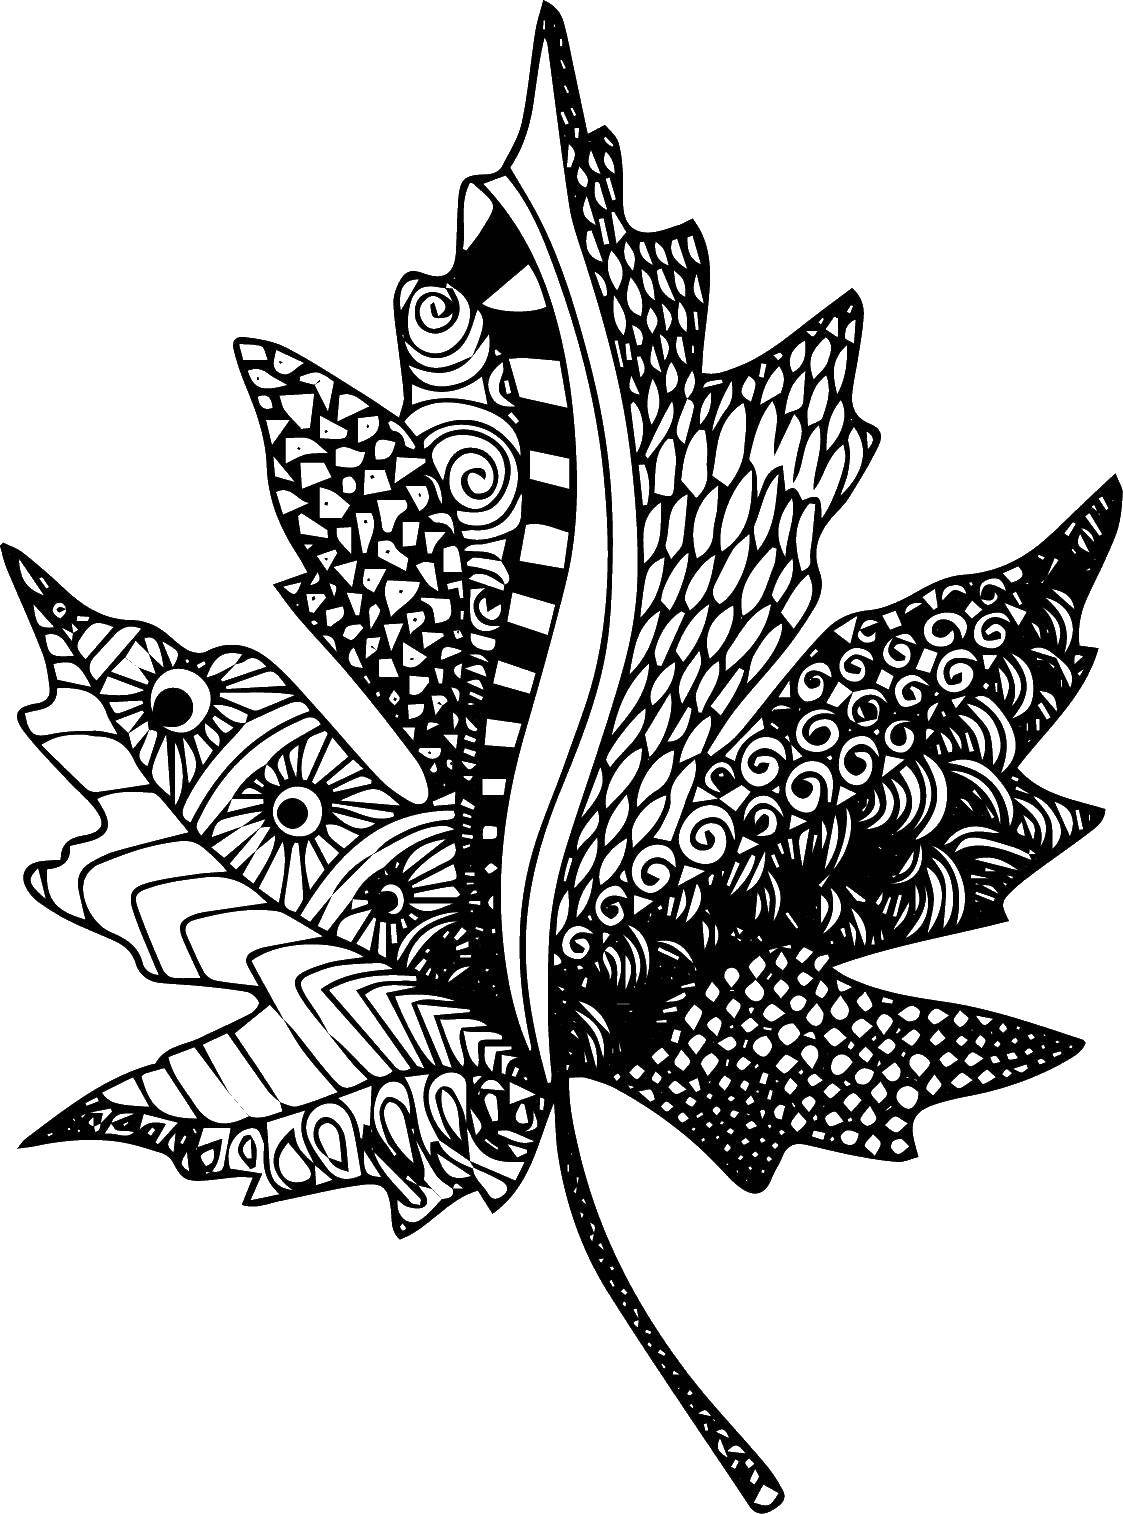 Coloring Patterned maple leaf. Category Bathroom with shower. Tags:  Bathroom with shower.